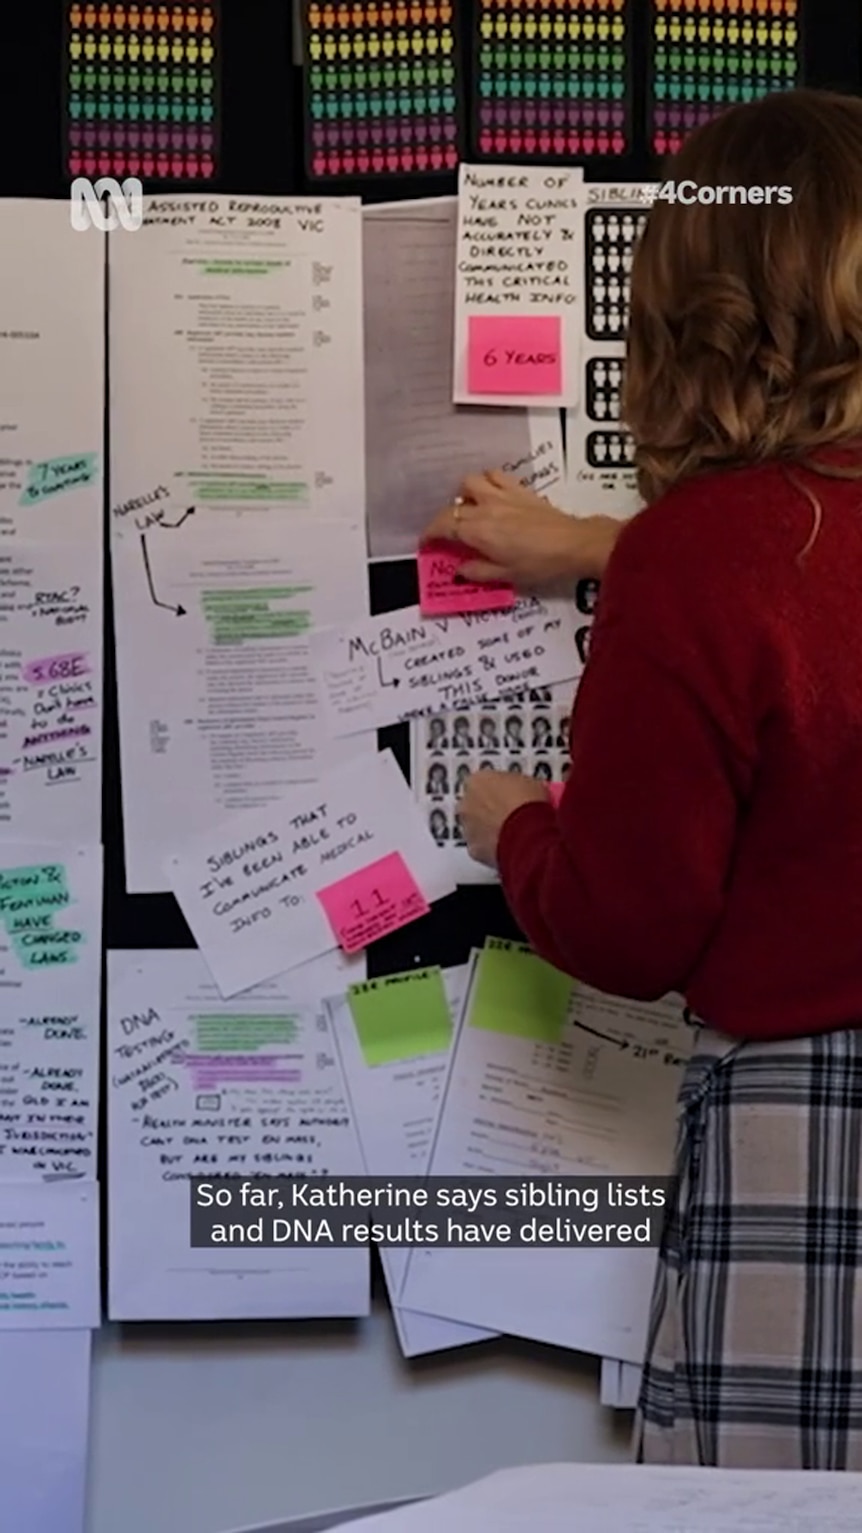 Somebody in women's clothes faces away from the camera fiddling with documents displayed on a whiteboard